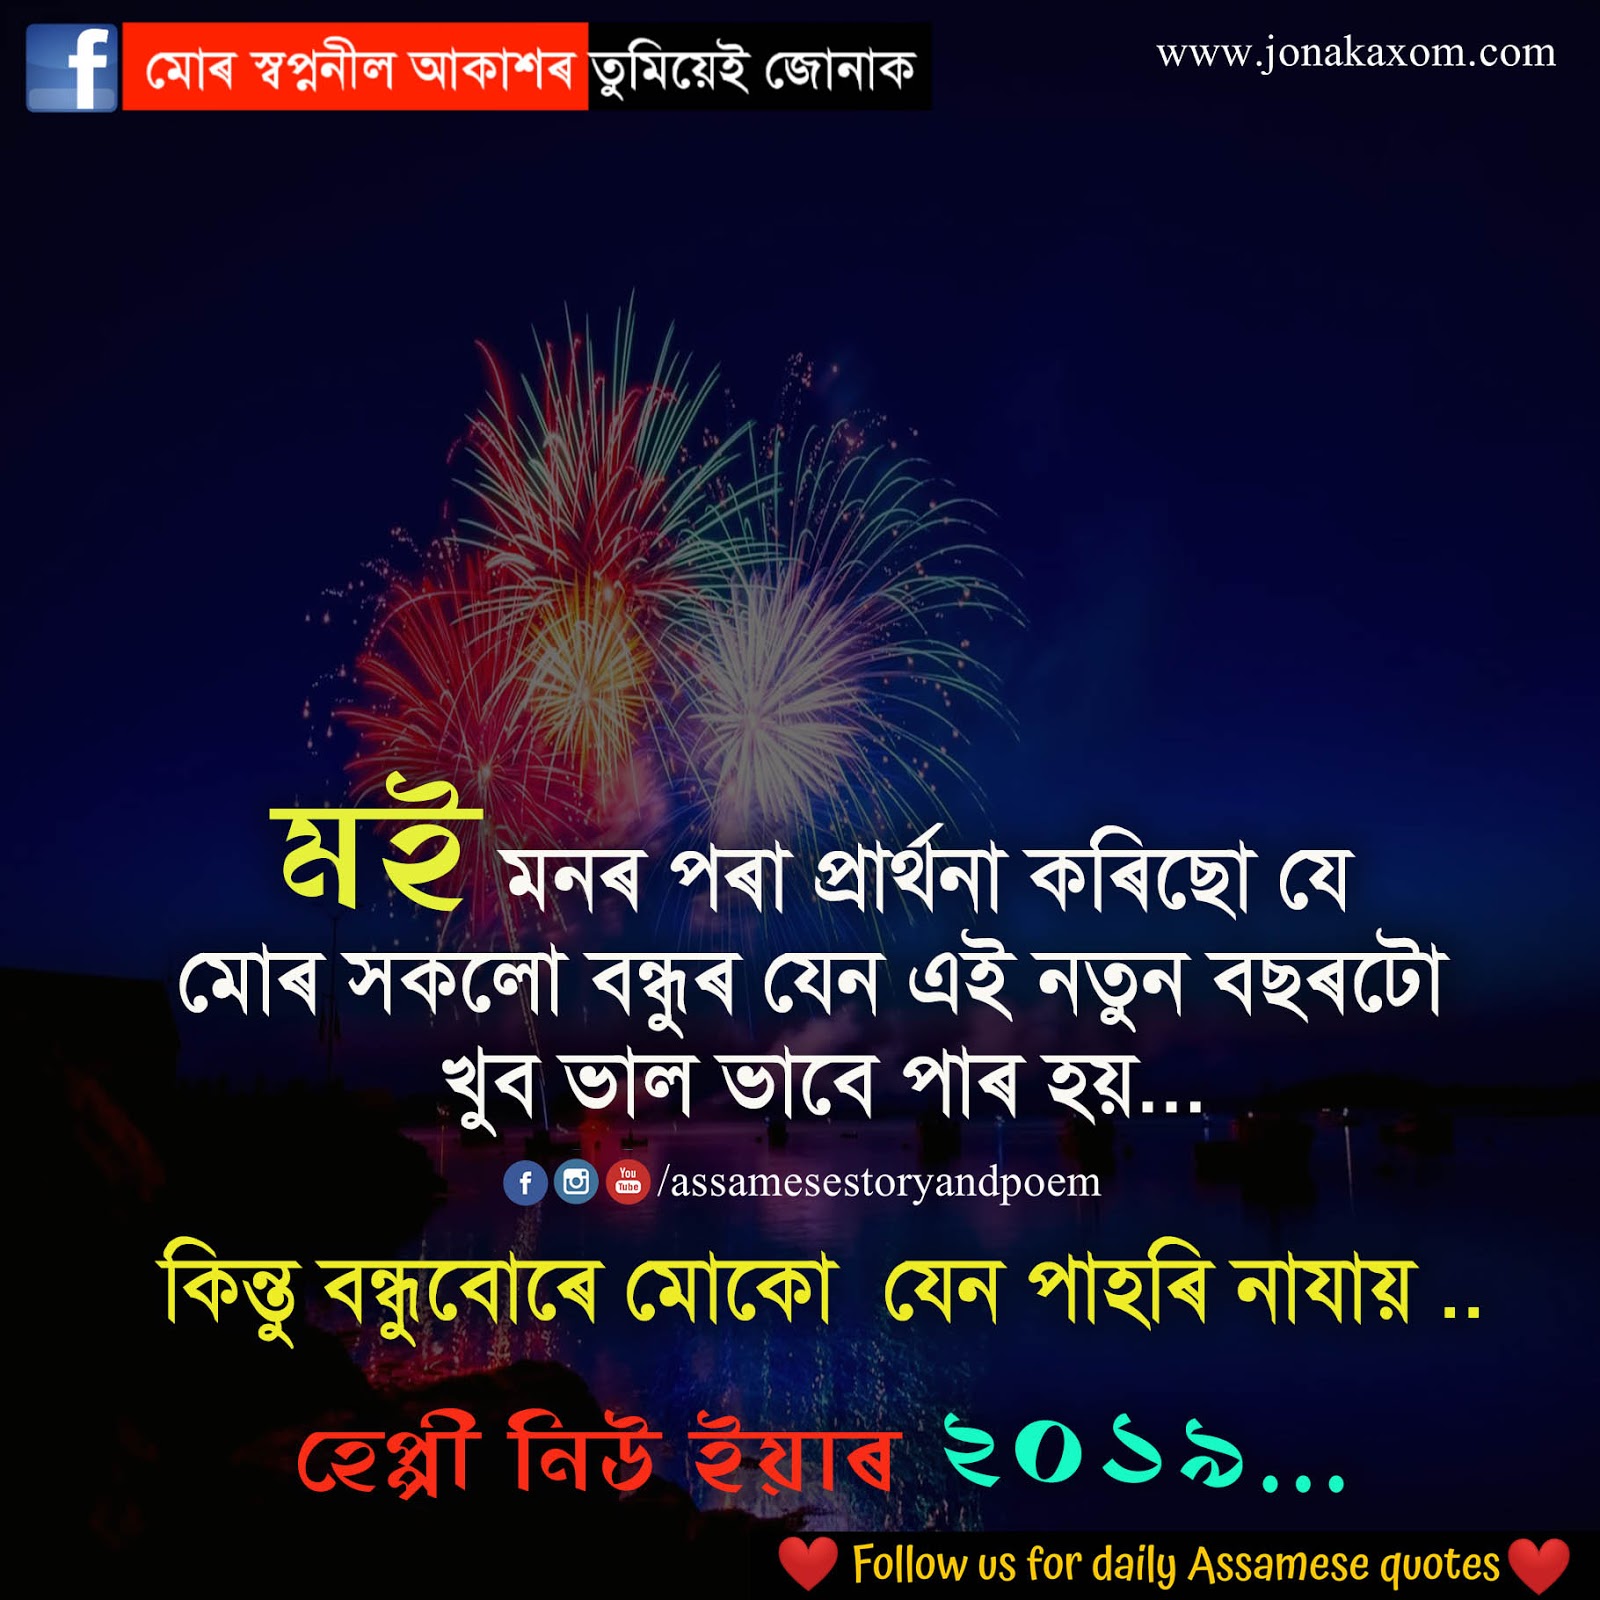 Happy New Year 2019 status, quotes, messages  in Assamese